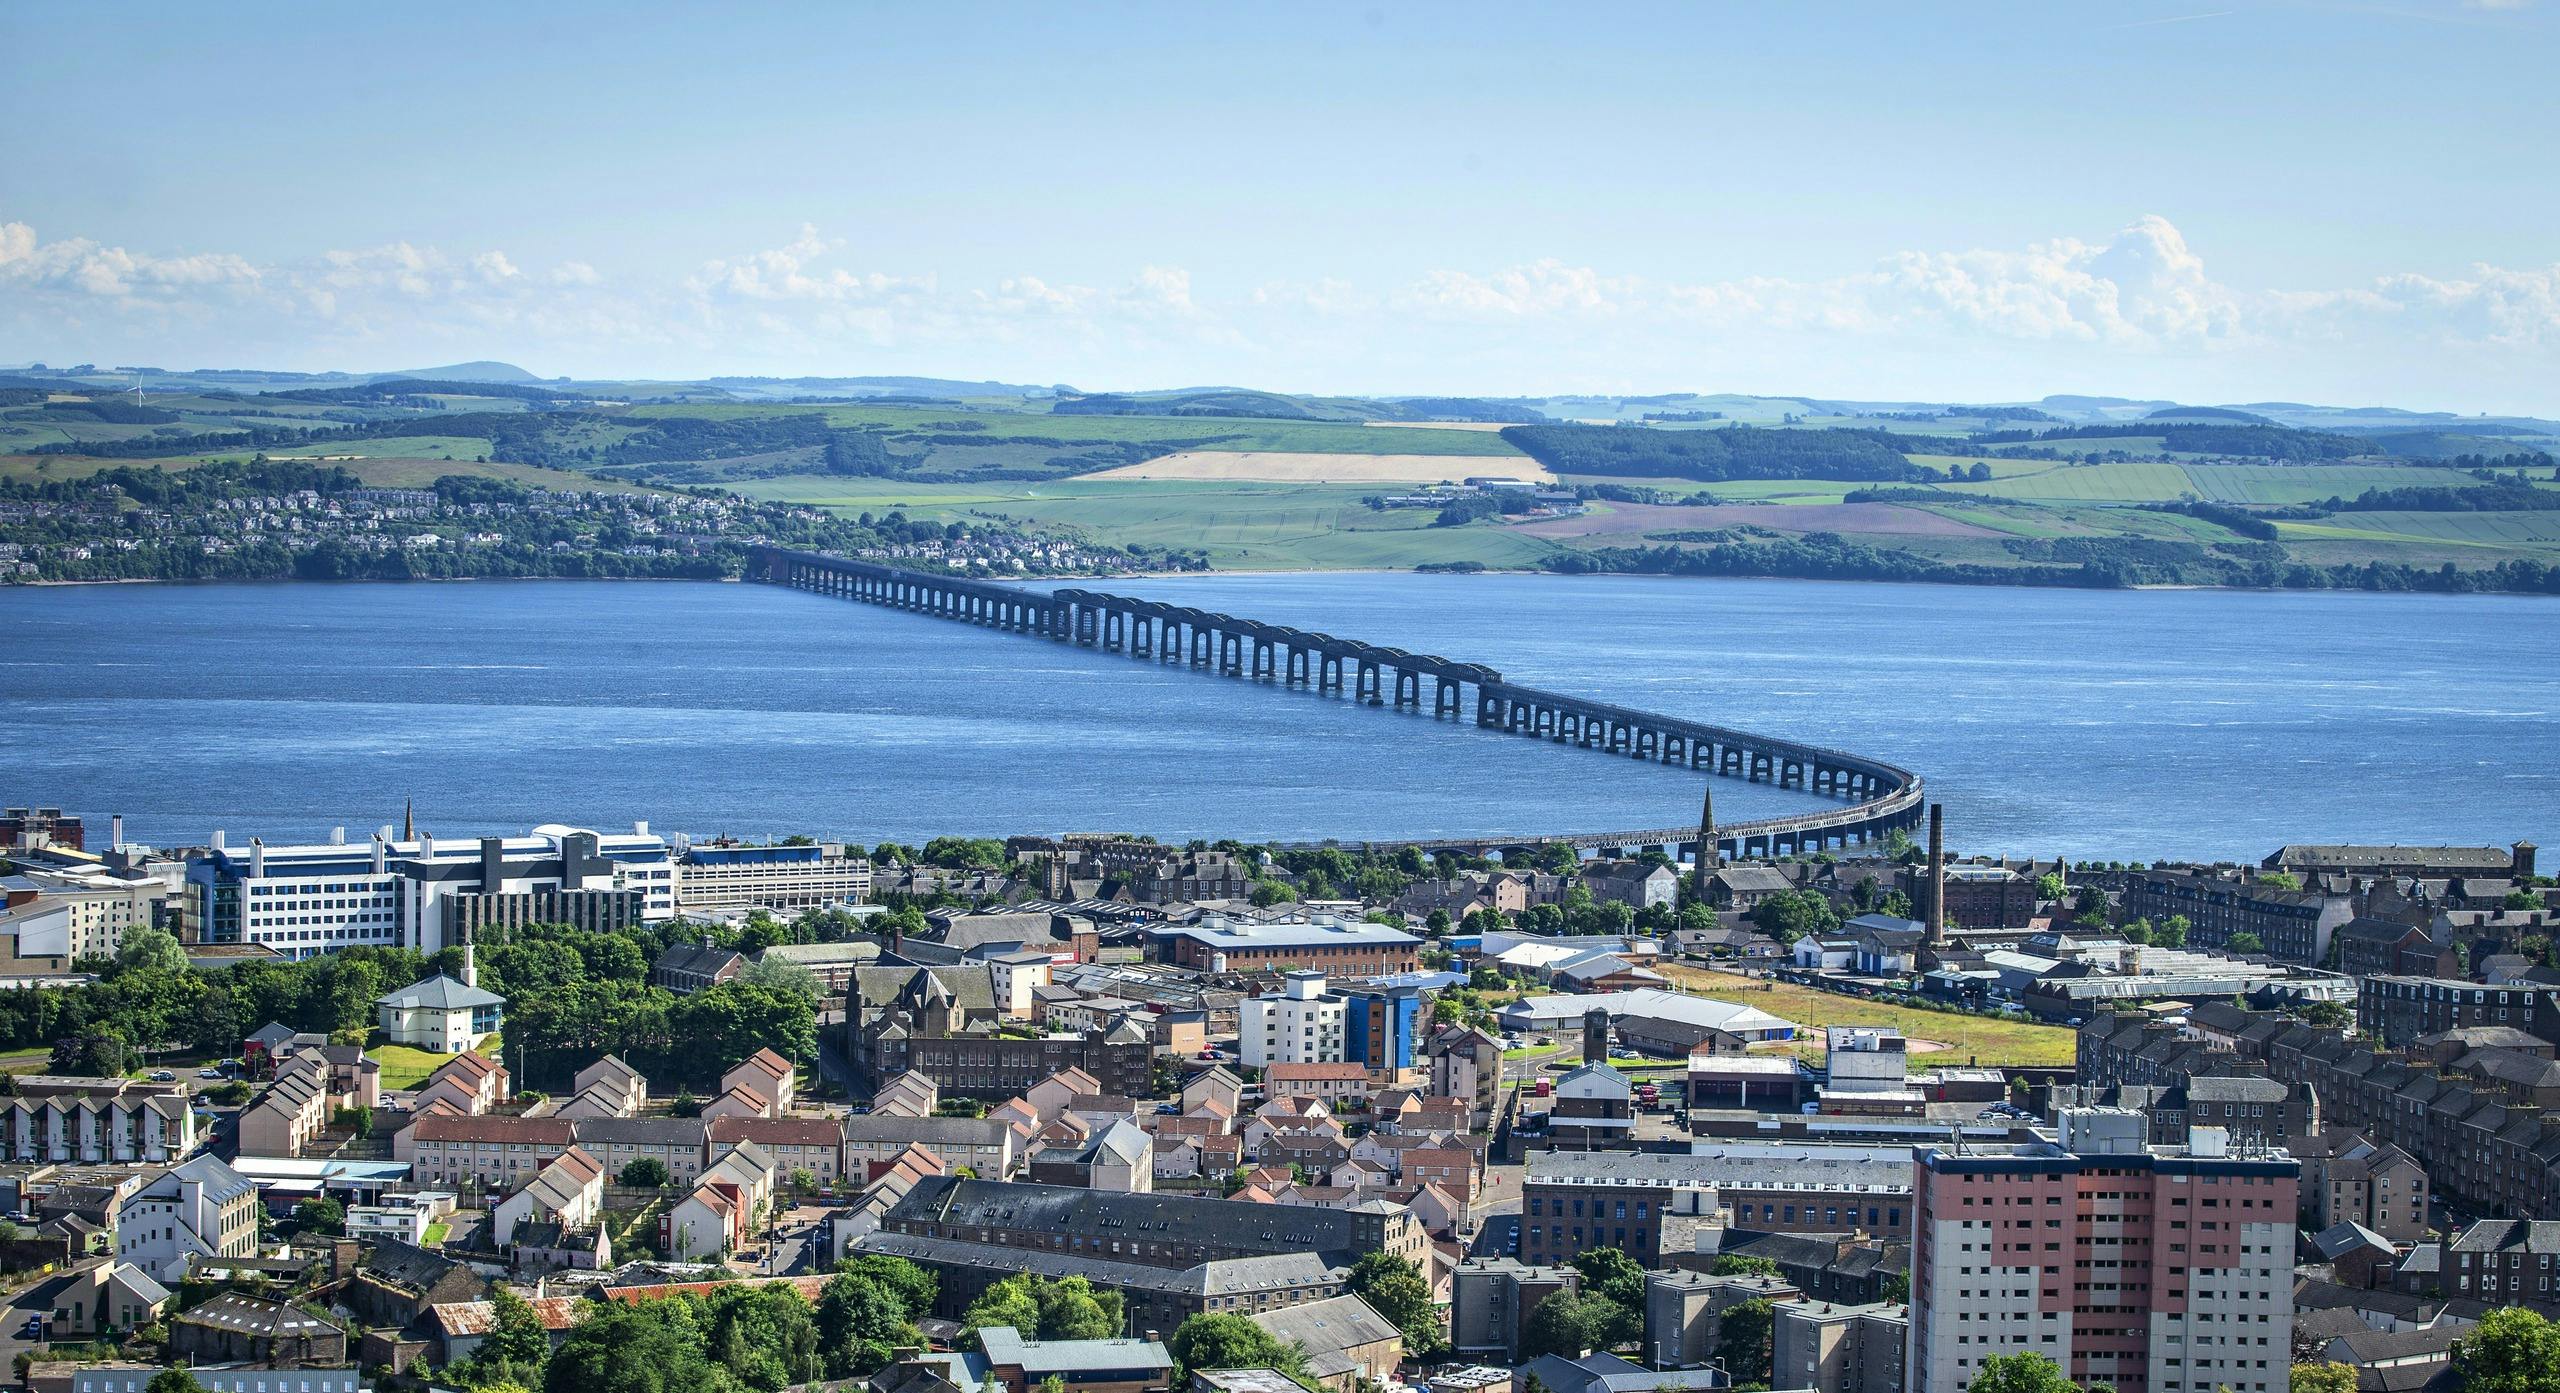 The Tay Rail Bridge seen from The Dundee Law